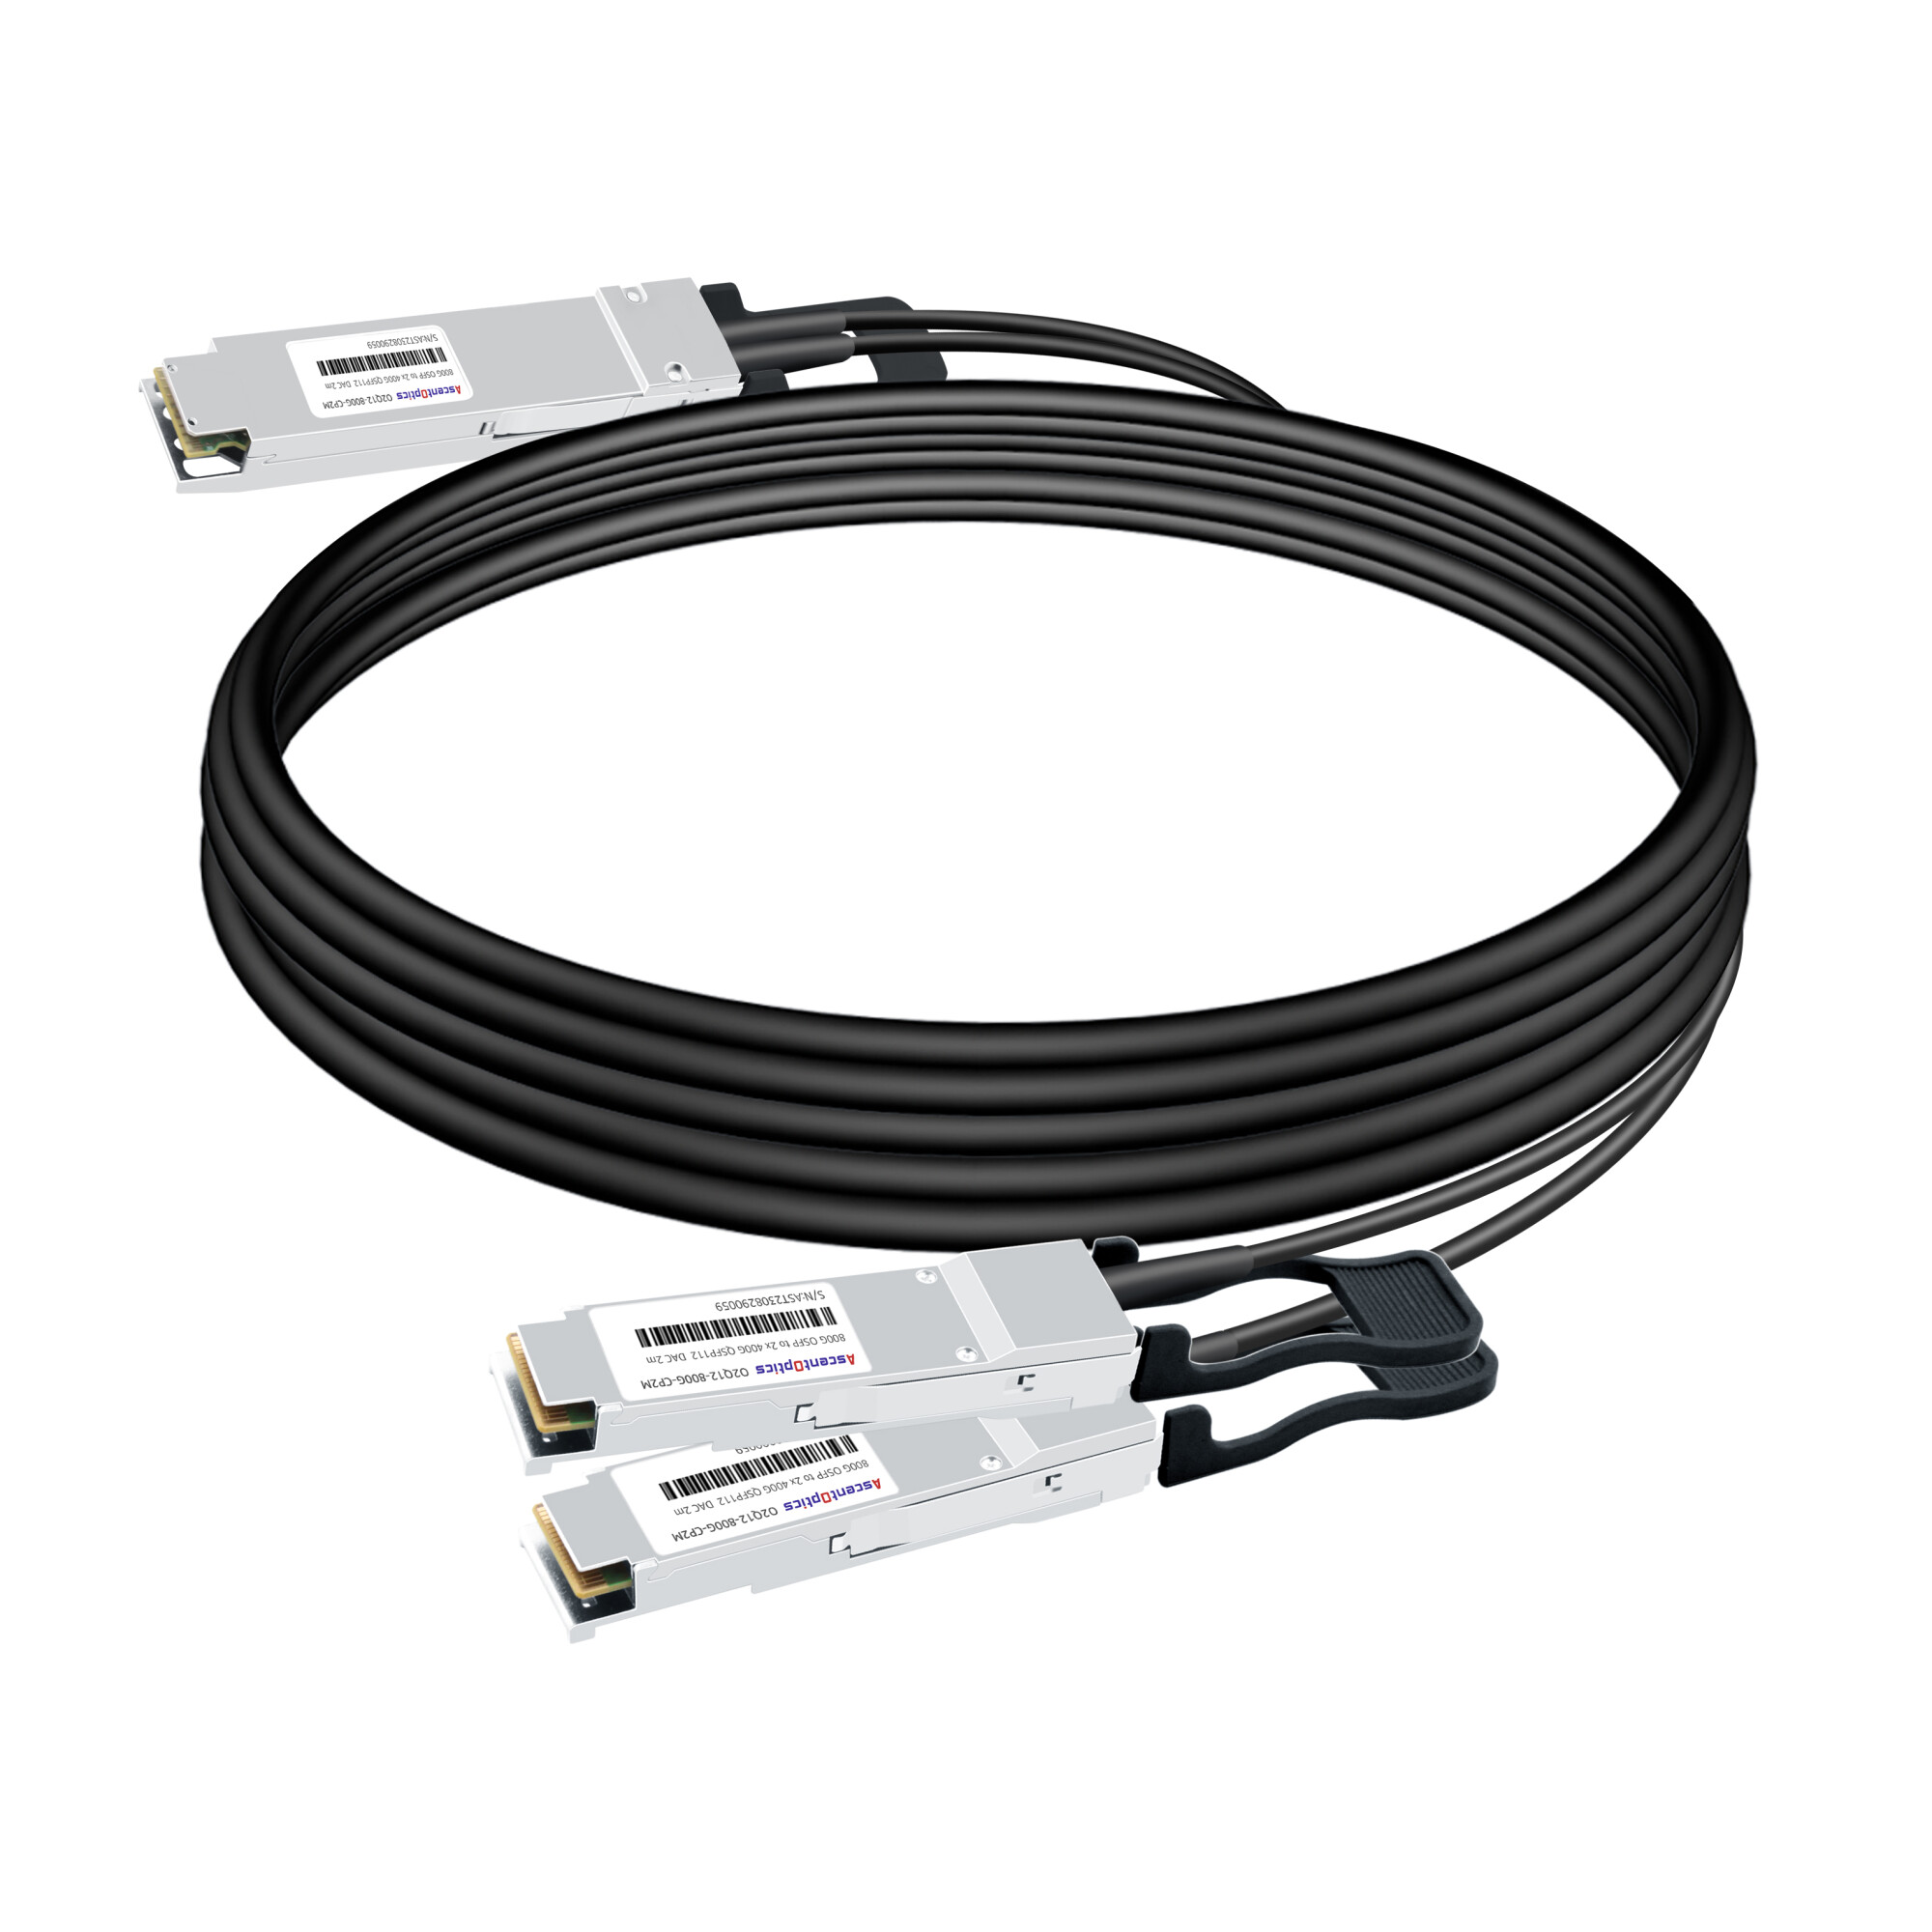 800G OSFP to 2x 400G QSFP112 Copper Breakout Cable,2 Meter